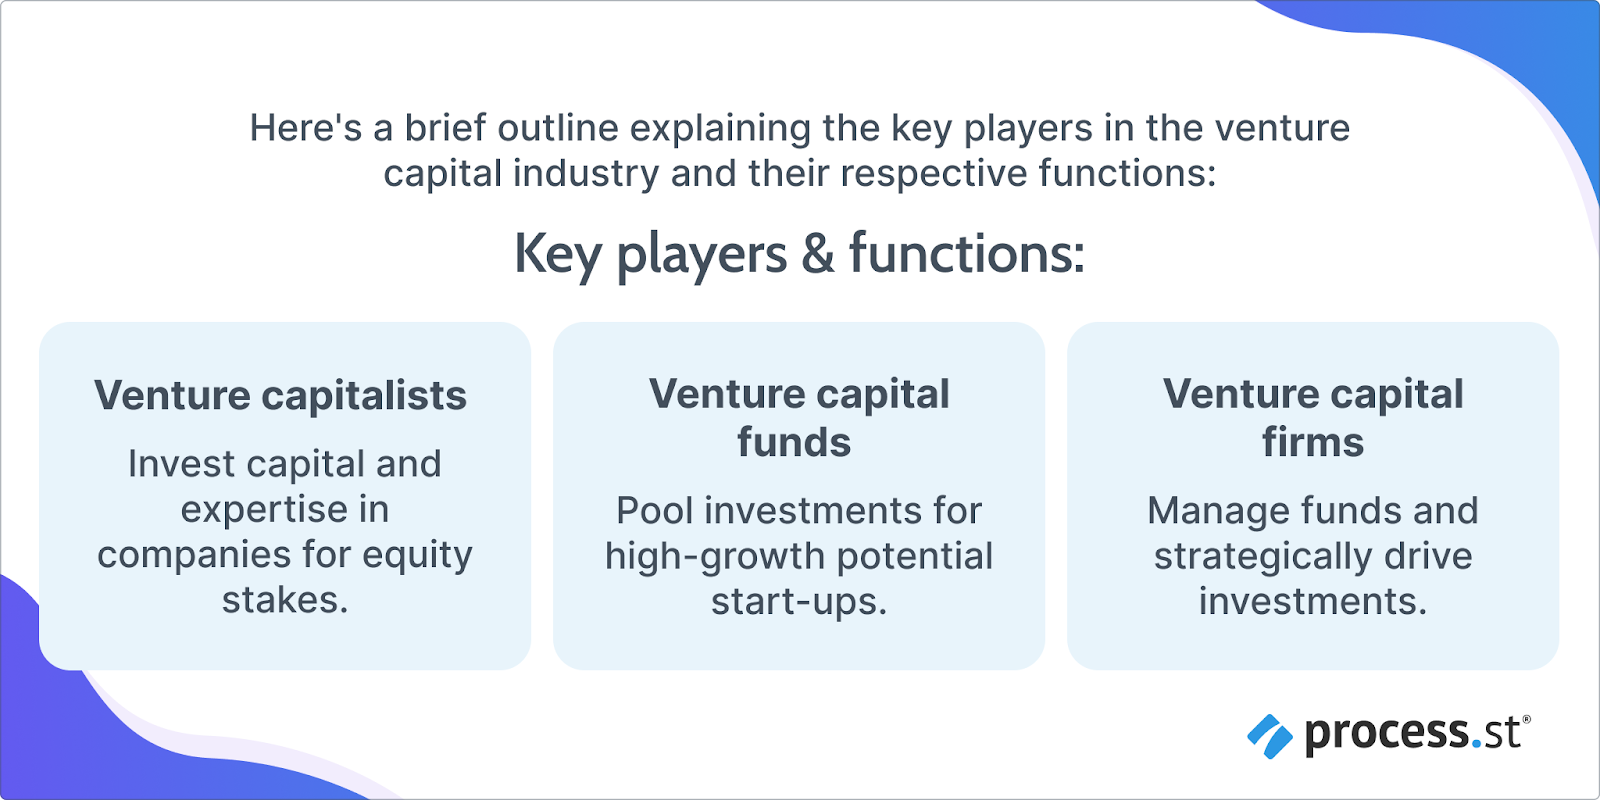 Image showing the key players in the venture capital industry and their respective functions